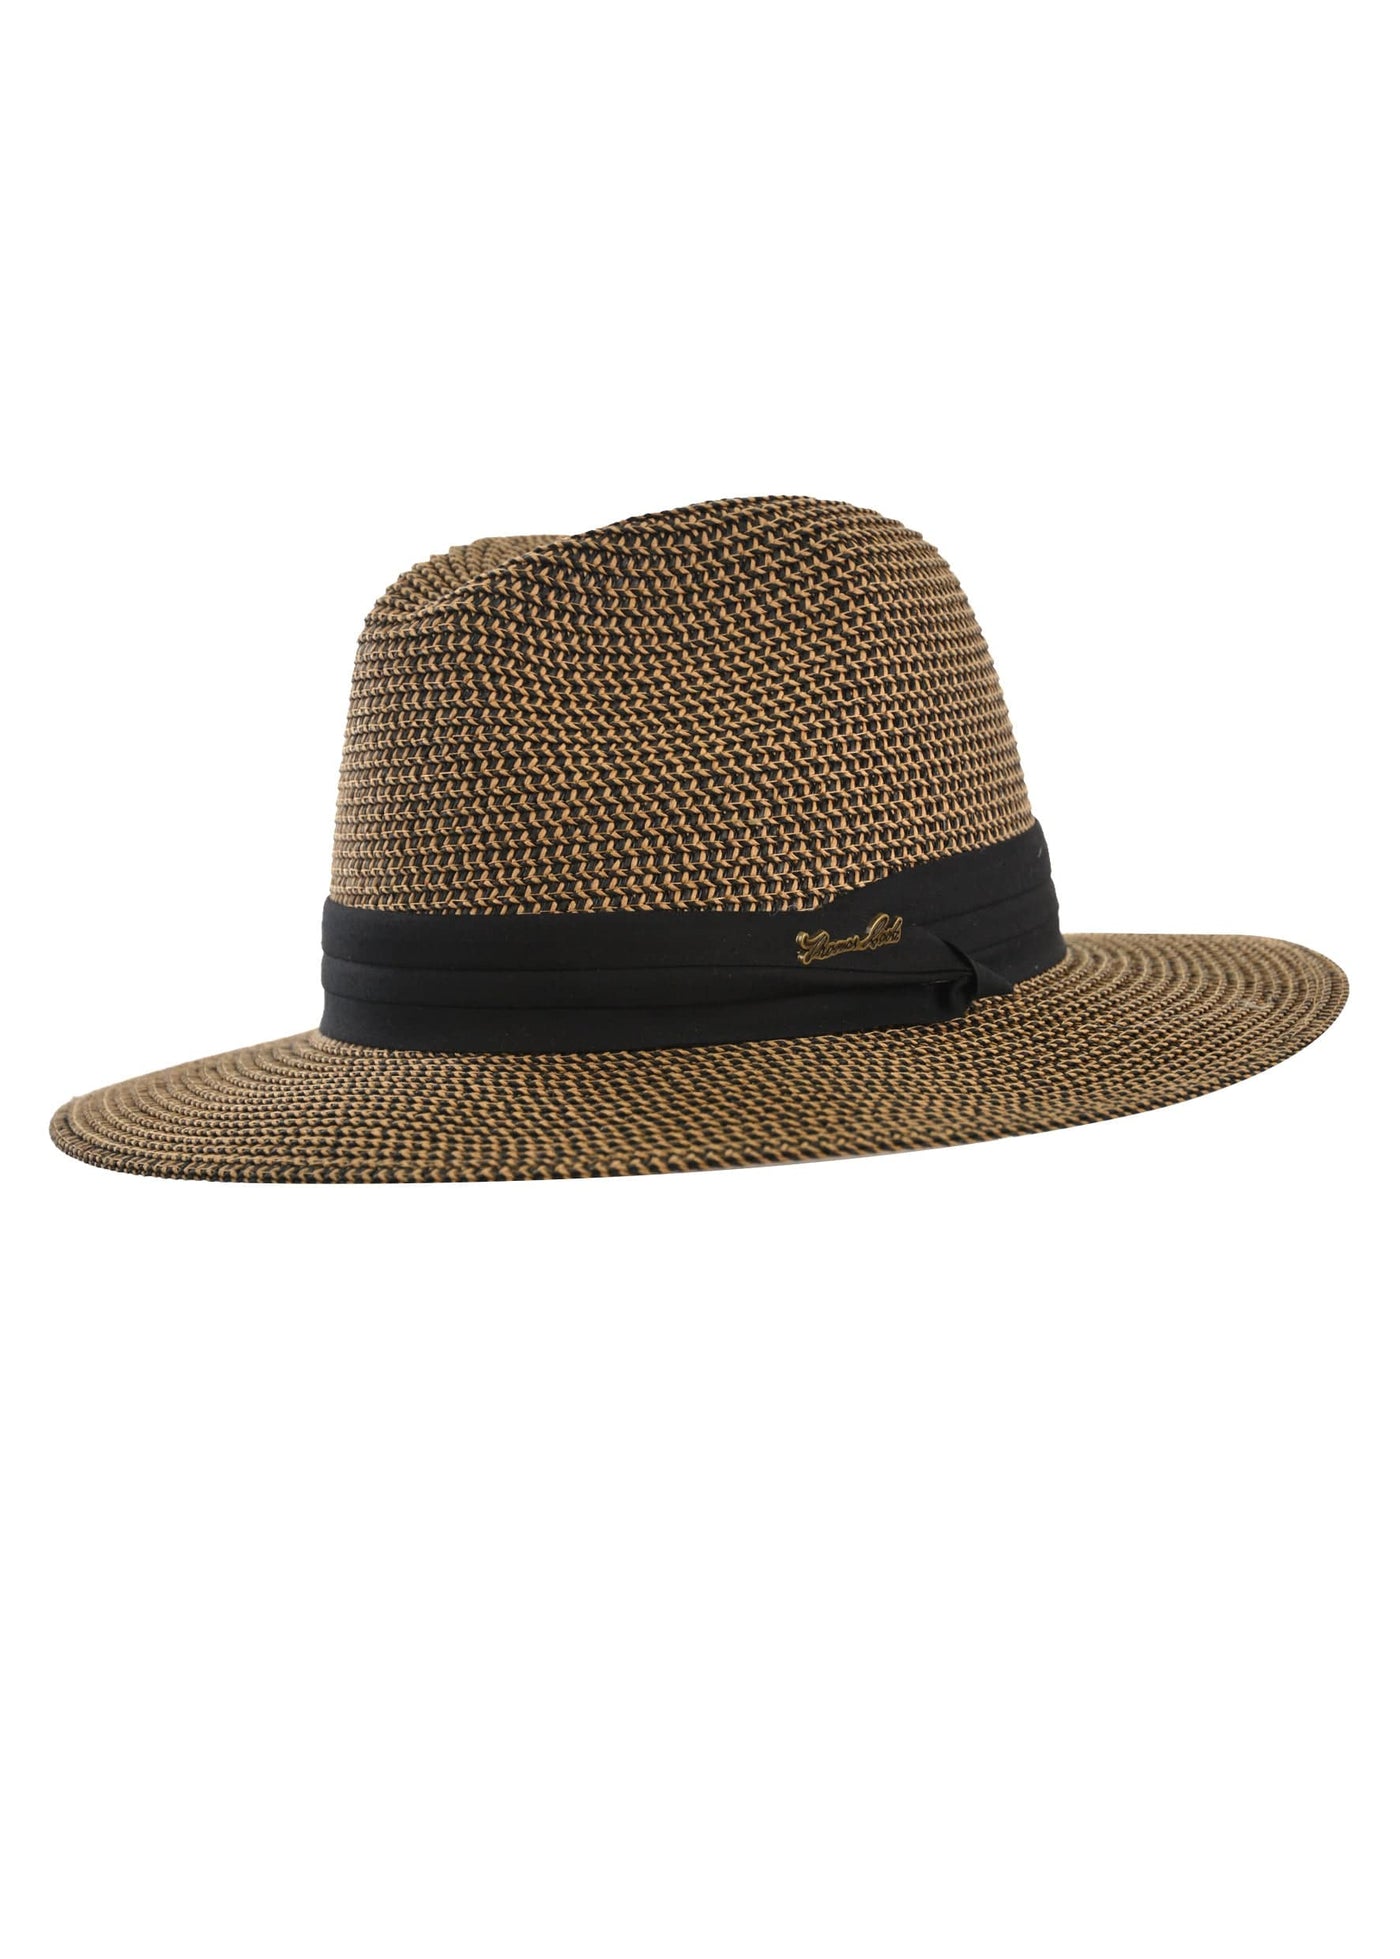 THOMAS COOK BOOTS AND CLOTHING HAT TCP1934HAT Stamford Hat | Tan/Black